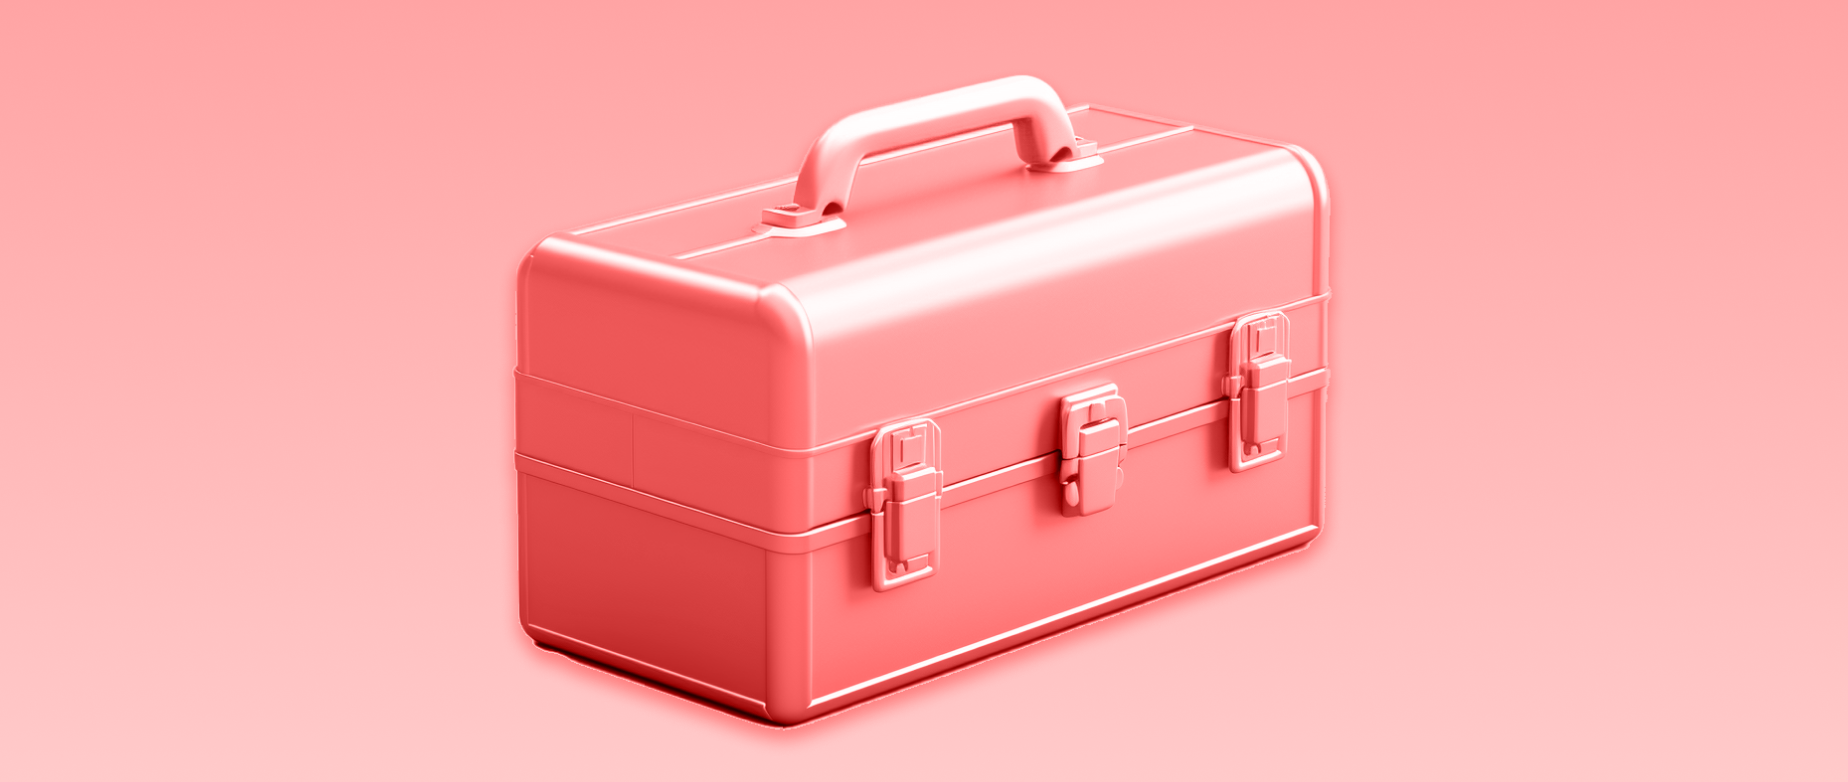 A pink toolbox on a light pink background.